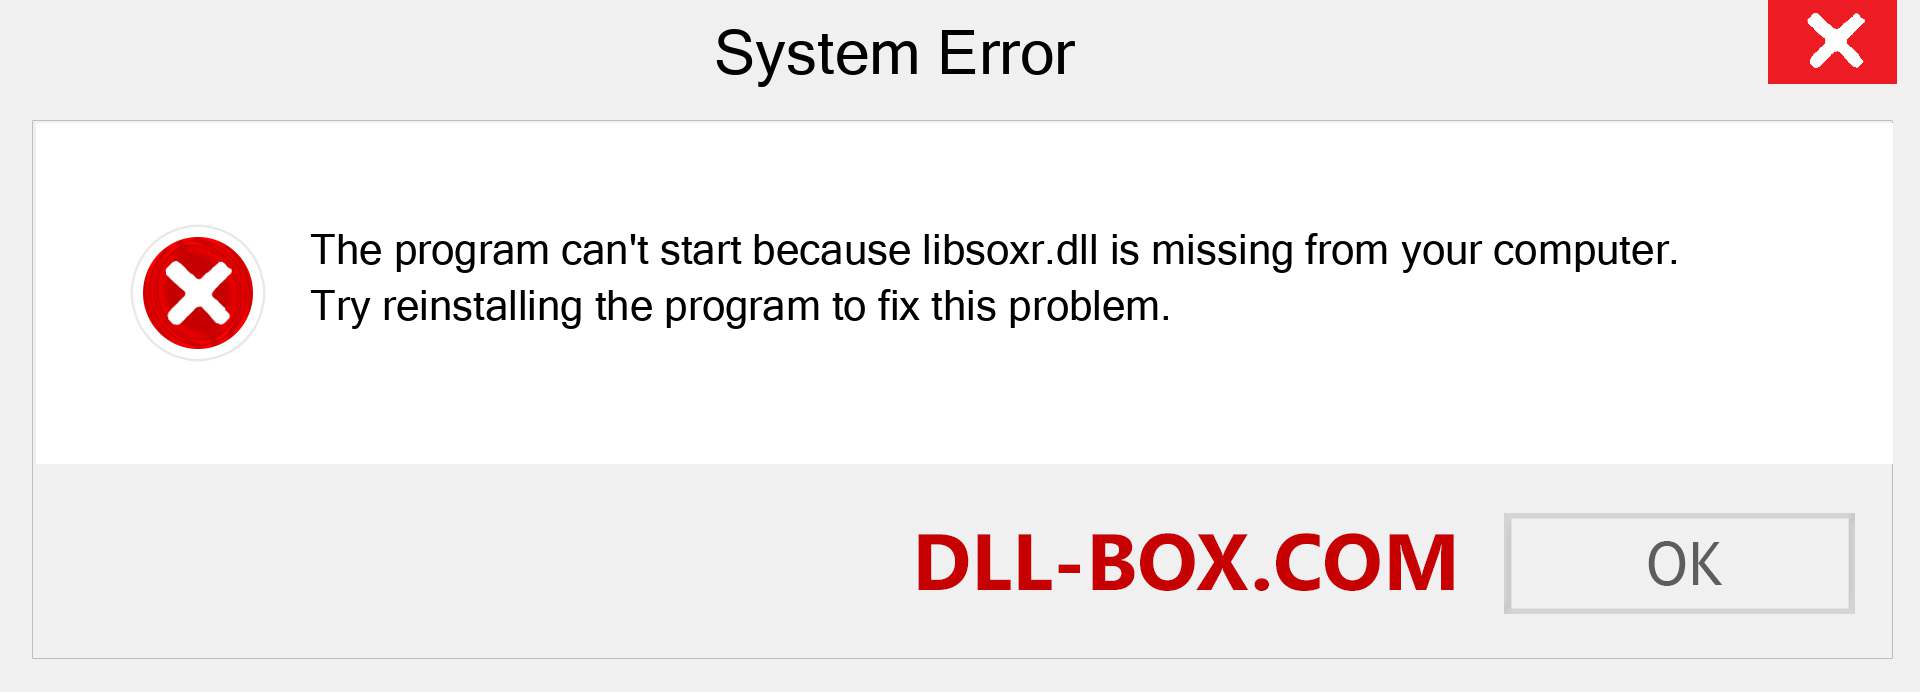  libsoxr.dll file is missing?. Download for Windows 7, 8, 10 - Fix  libsoxr dll Missing Error on Windows, photos, images